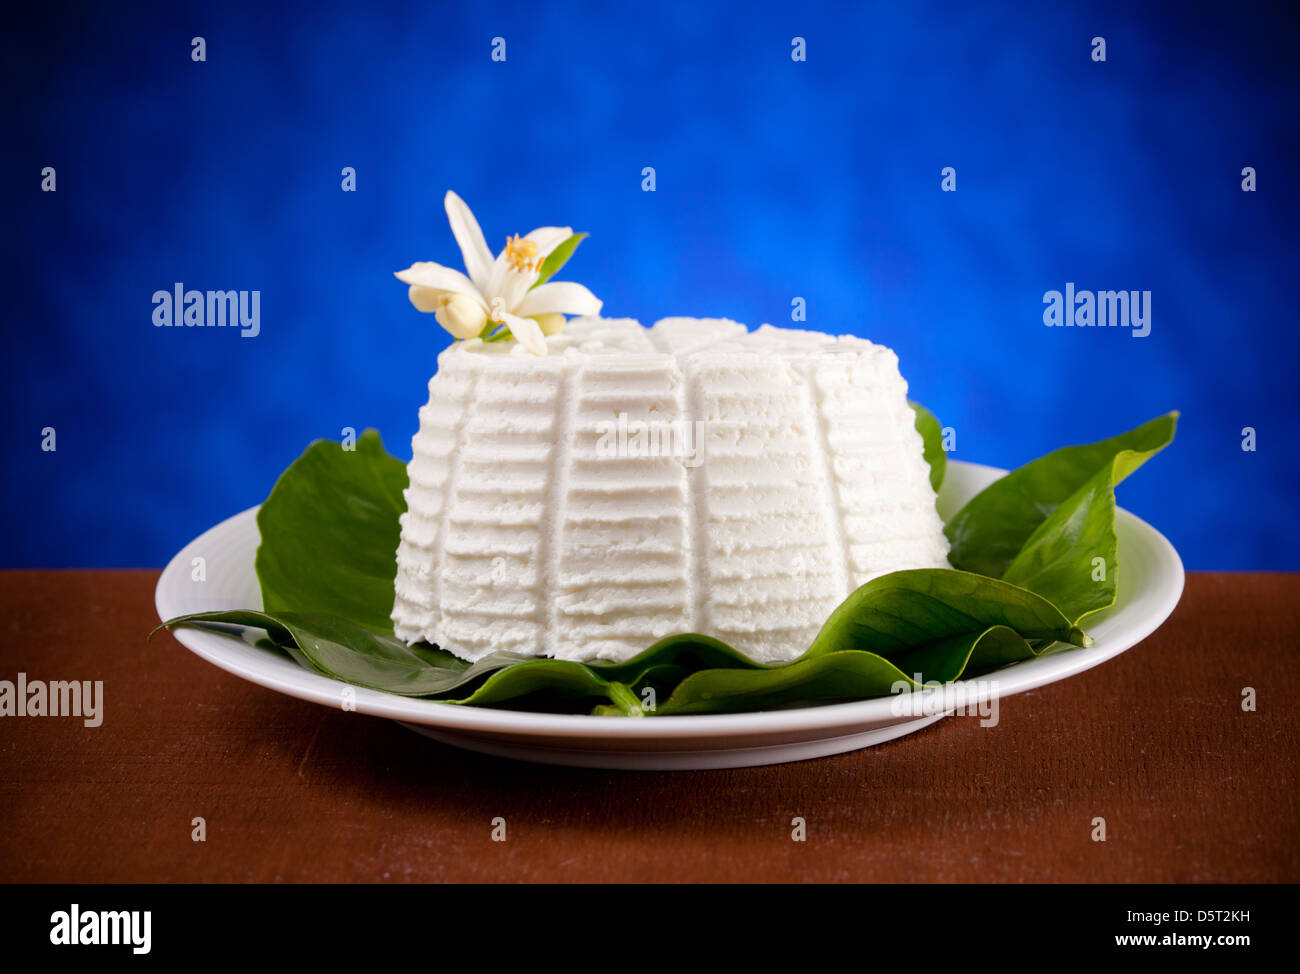 A typical Italian Dairy Product - Ricotta Stock Photo